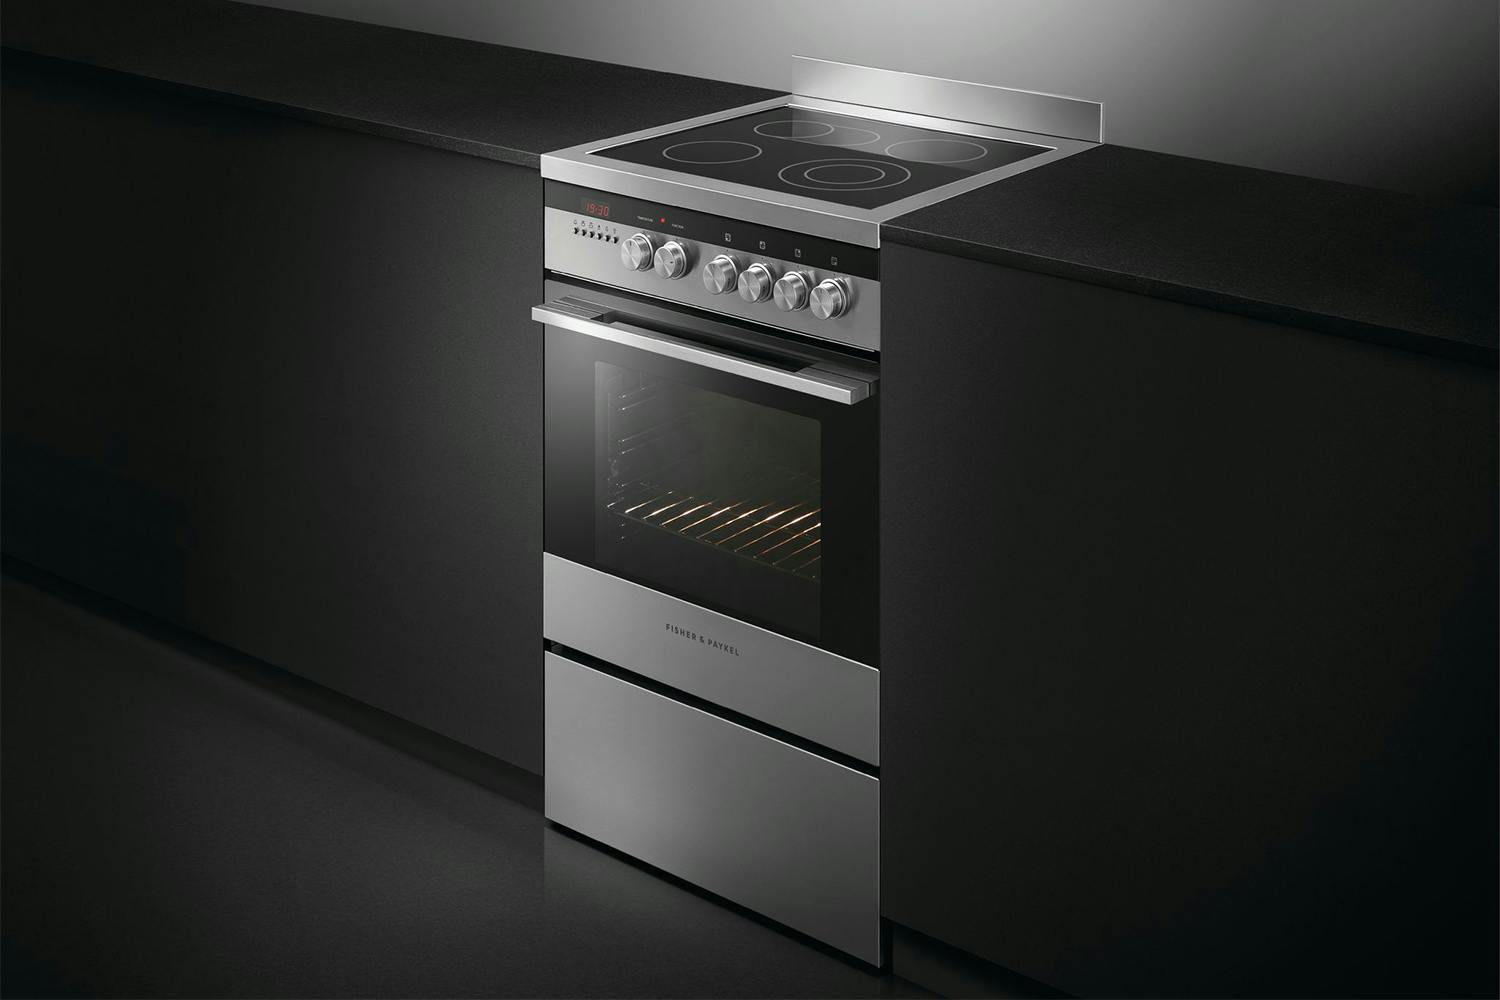 Fisher & Paykel 60cm Freestanding Oven w/ Electric Cooktop